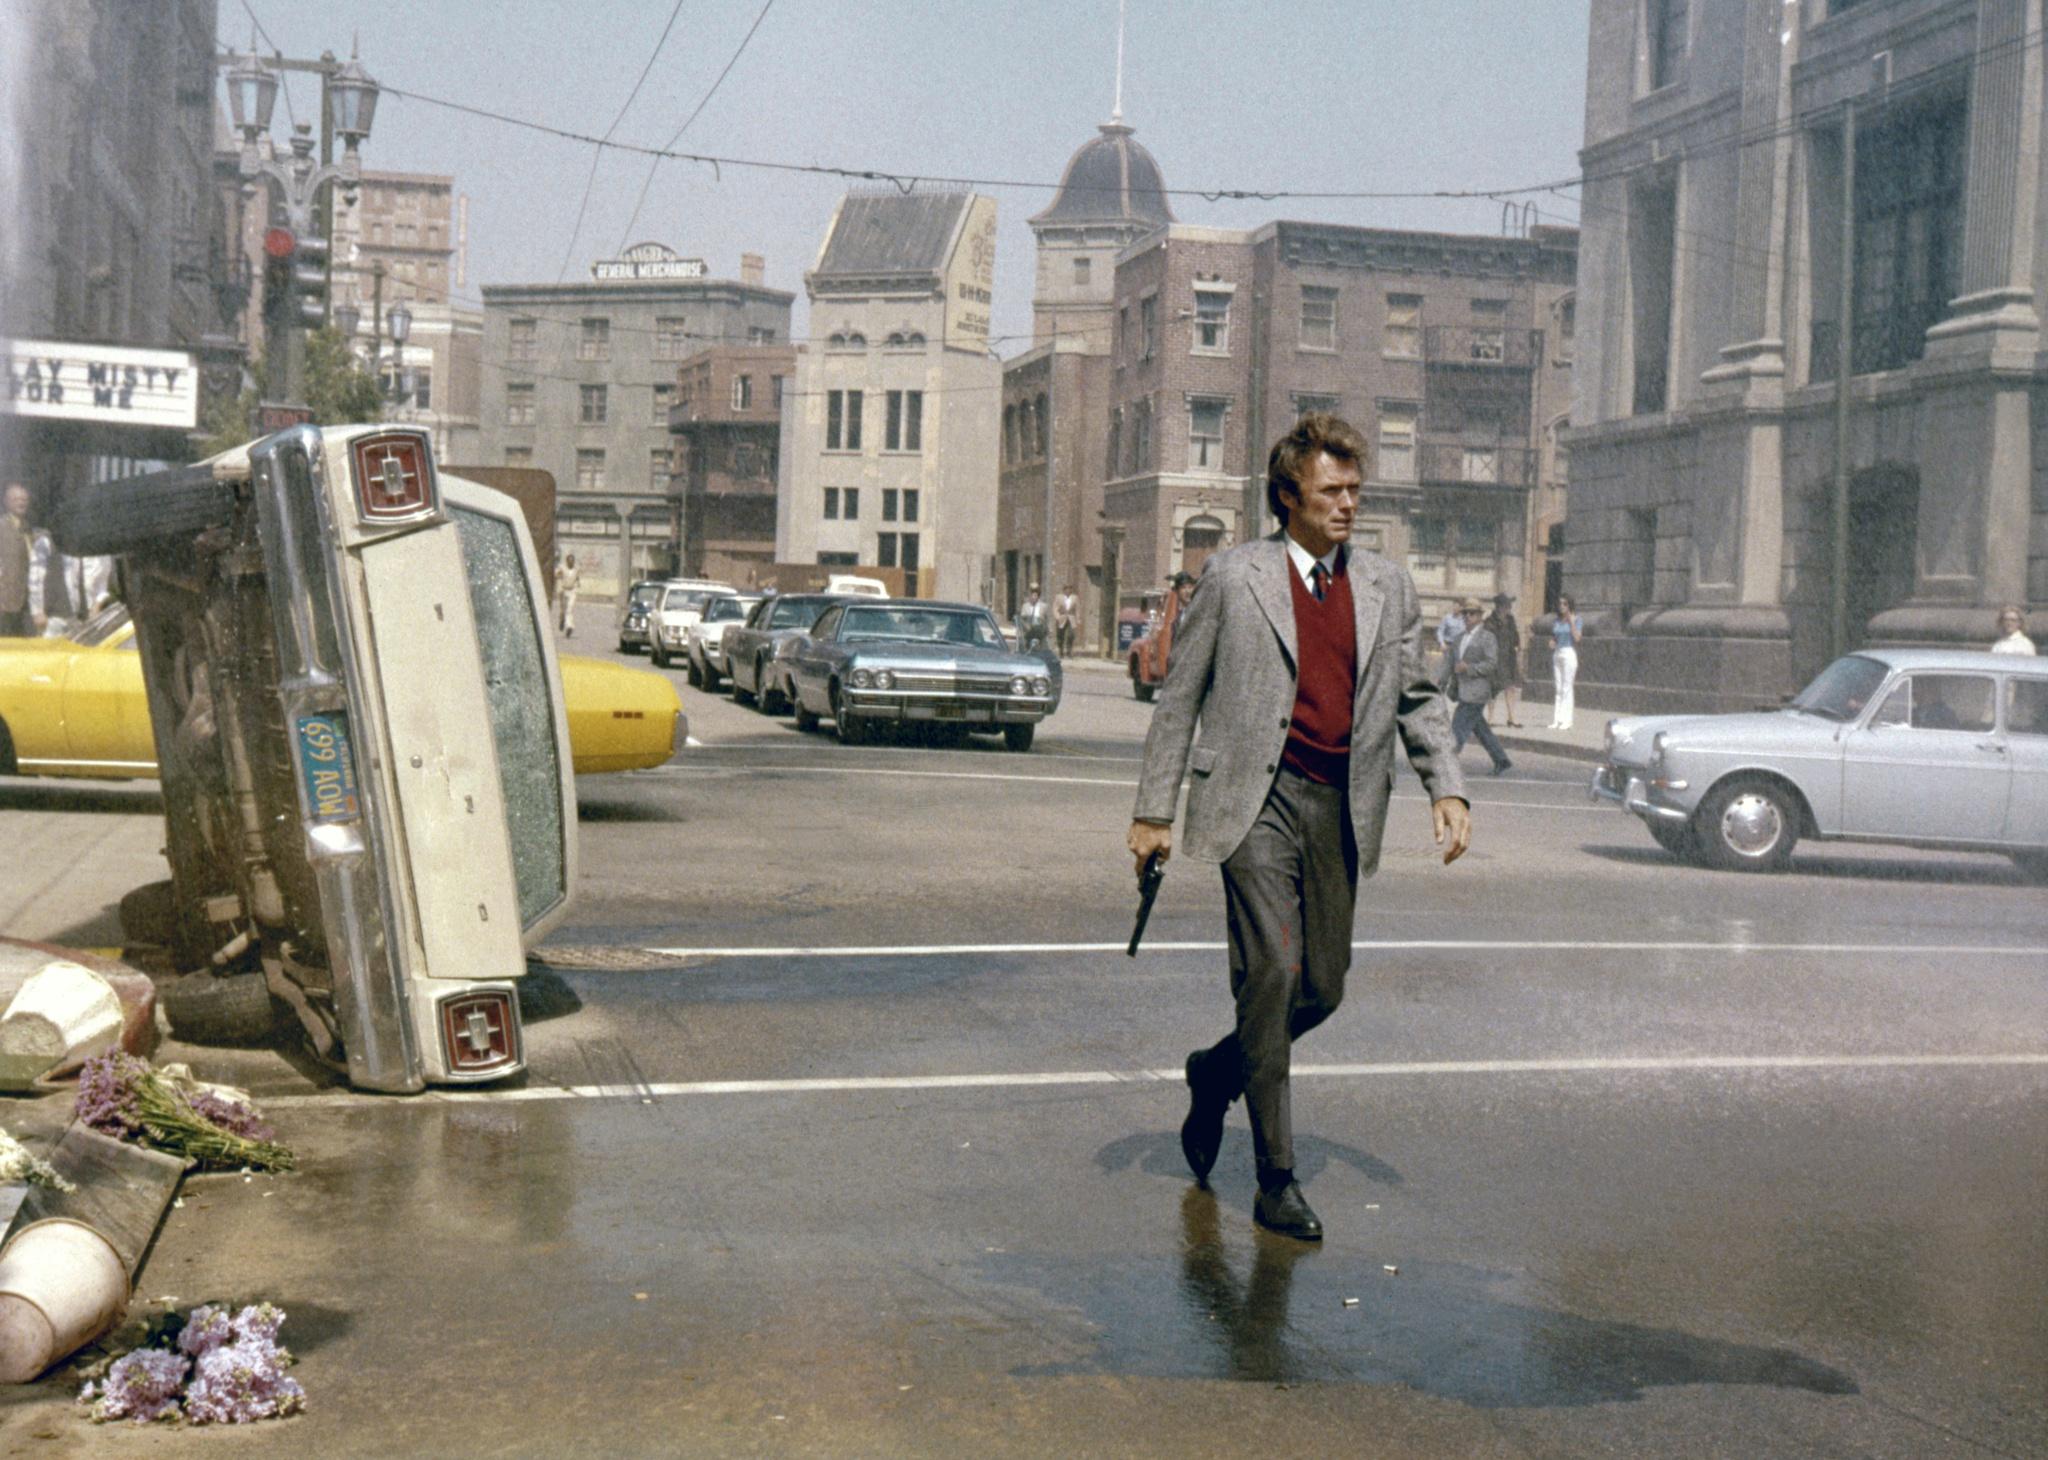 Clint Eastwood, wearing a sweater vest and blazer, walks down a wrecked city street with a gun by his side.